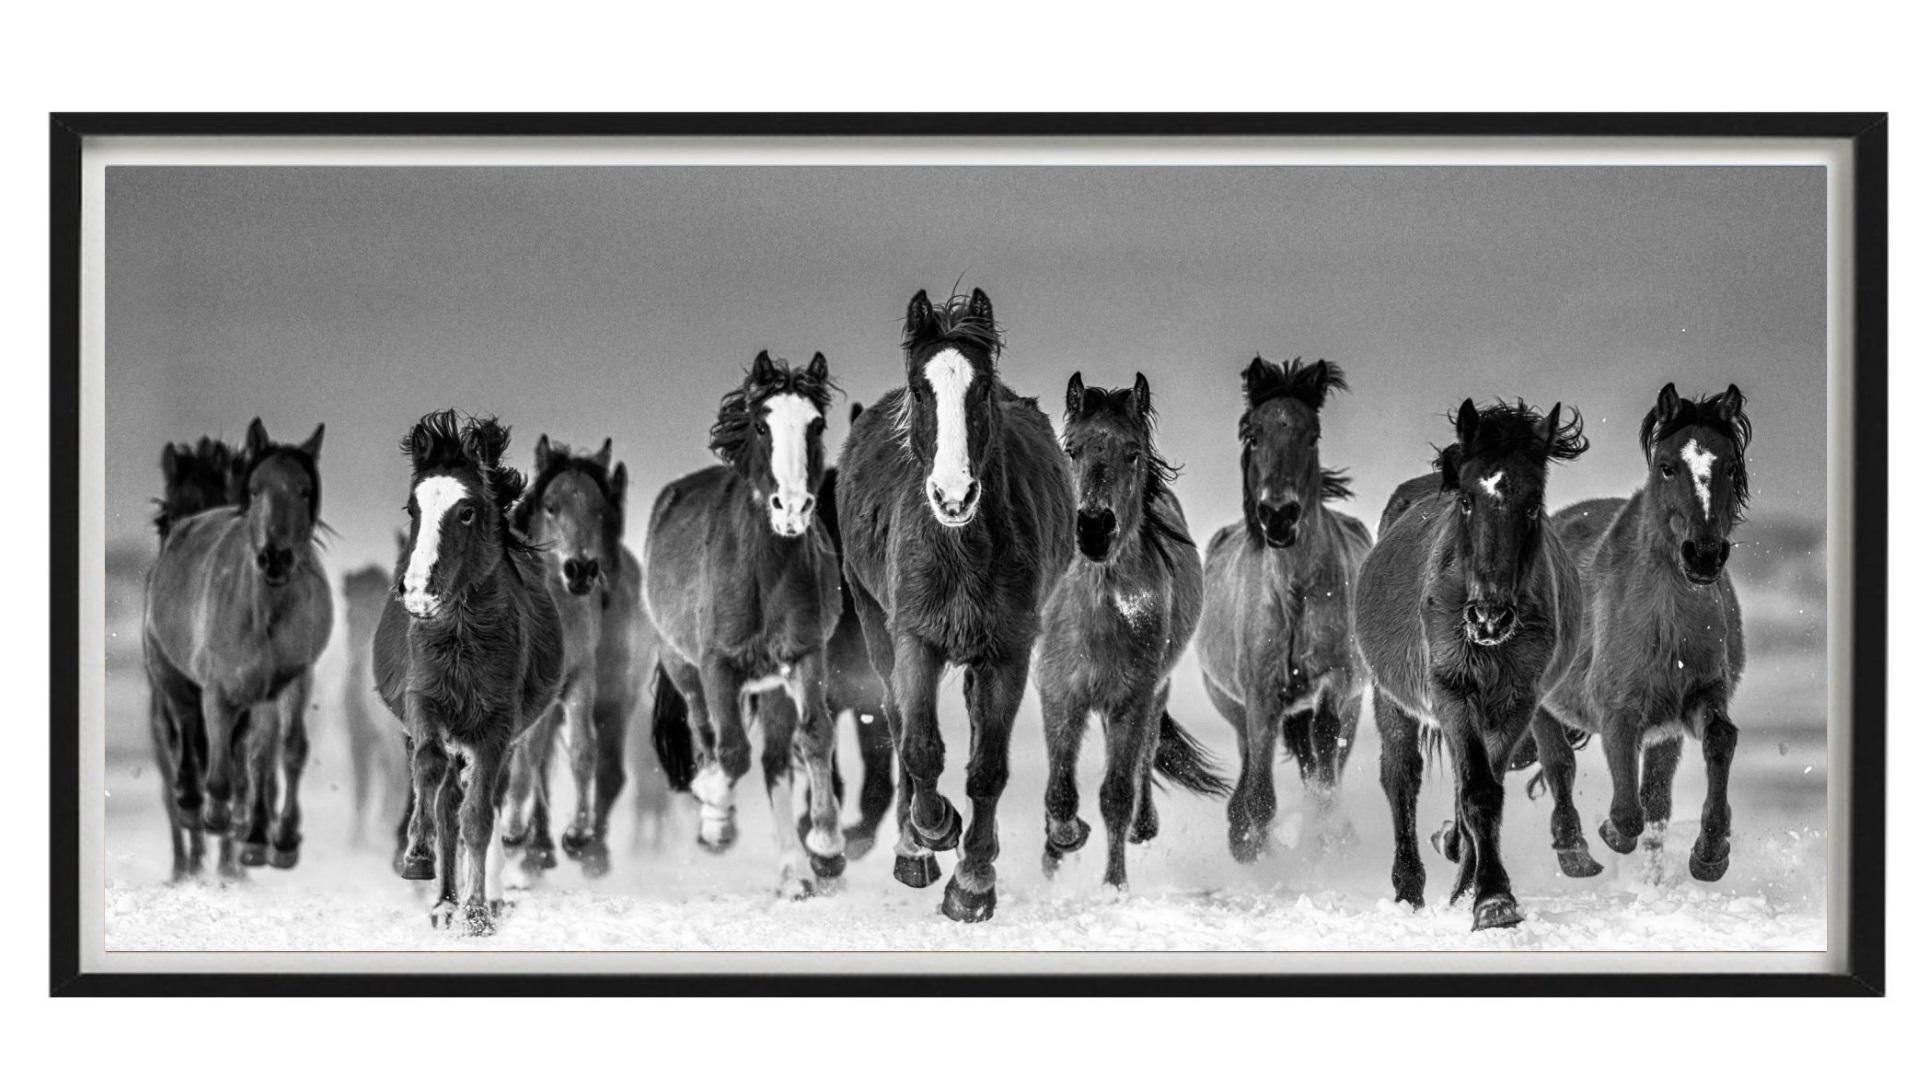 The Rolling Stones - wild mustang horses galloping in the snow  - Photograph by David Yarrow